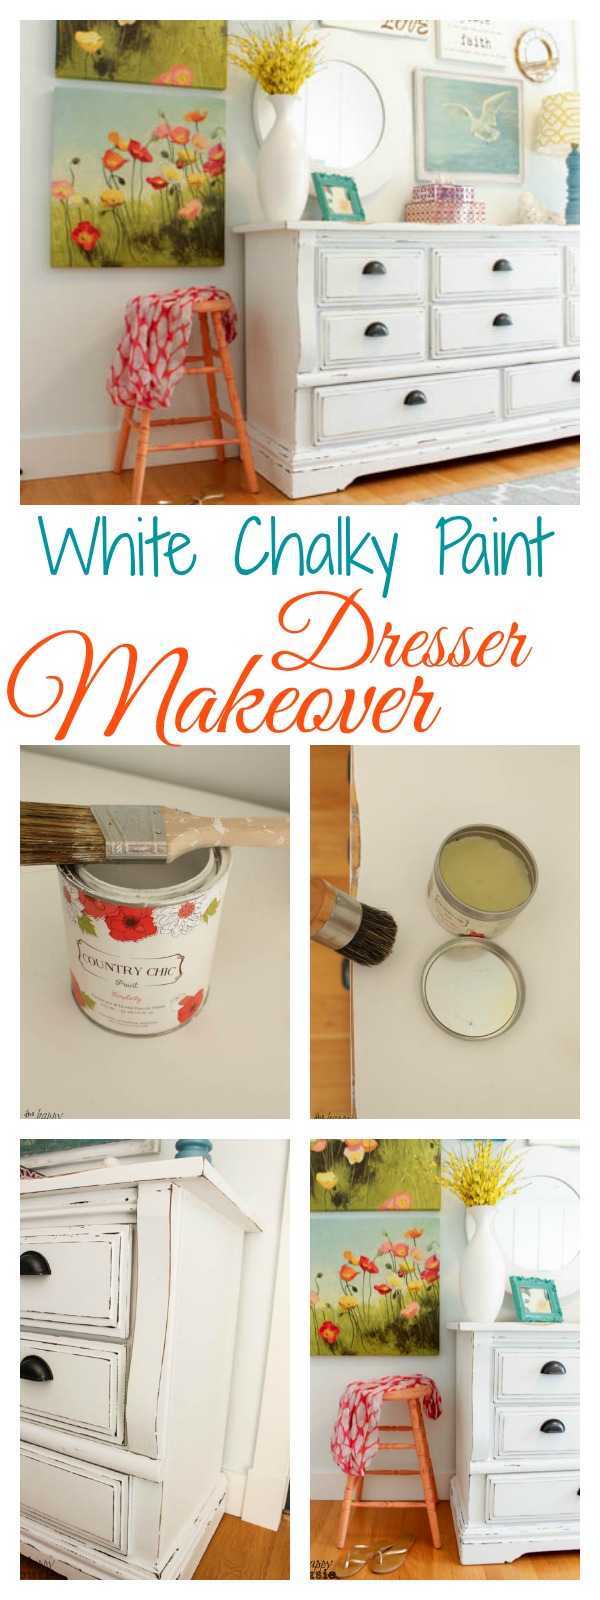 How to turn a dated old dresser into a beautiful statement piece with white chalky based paint poster.